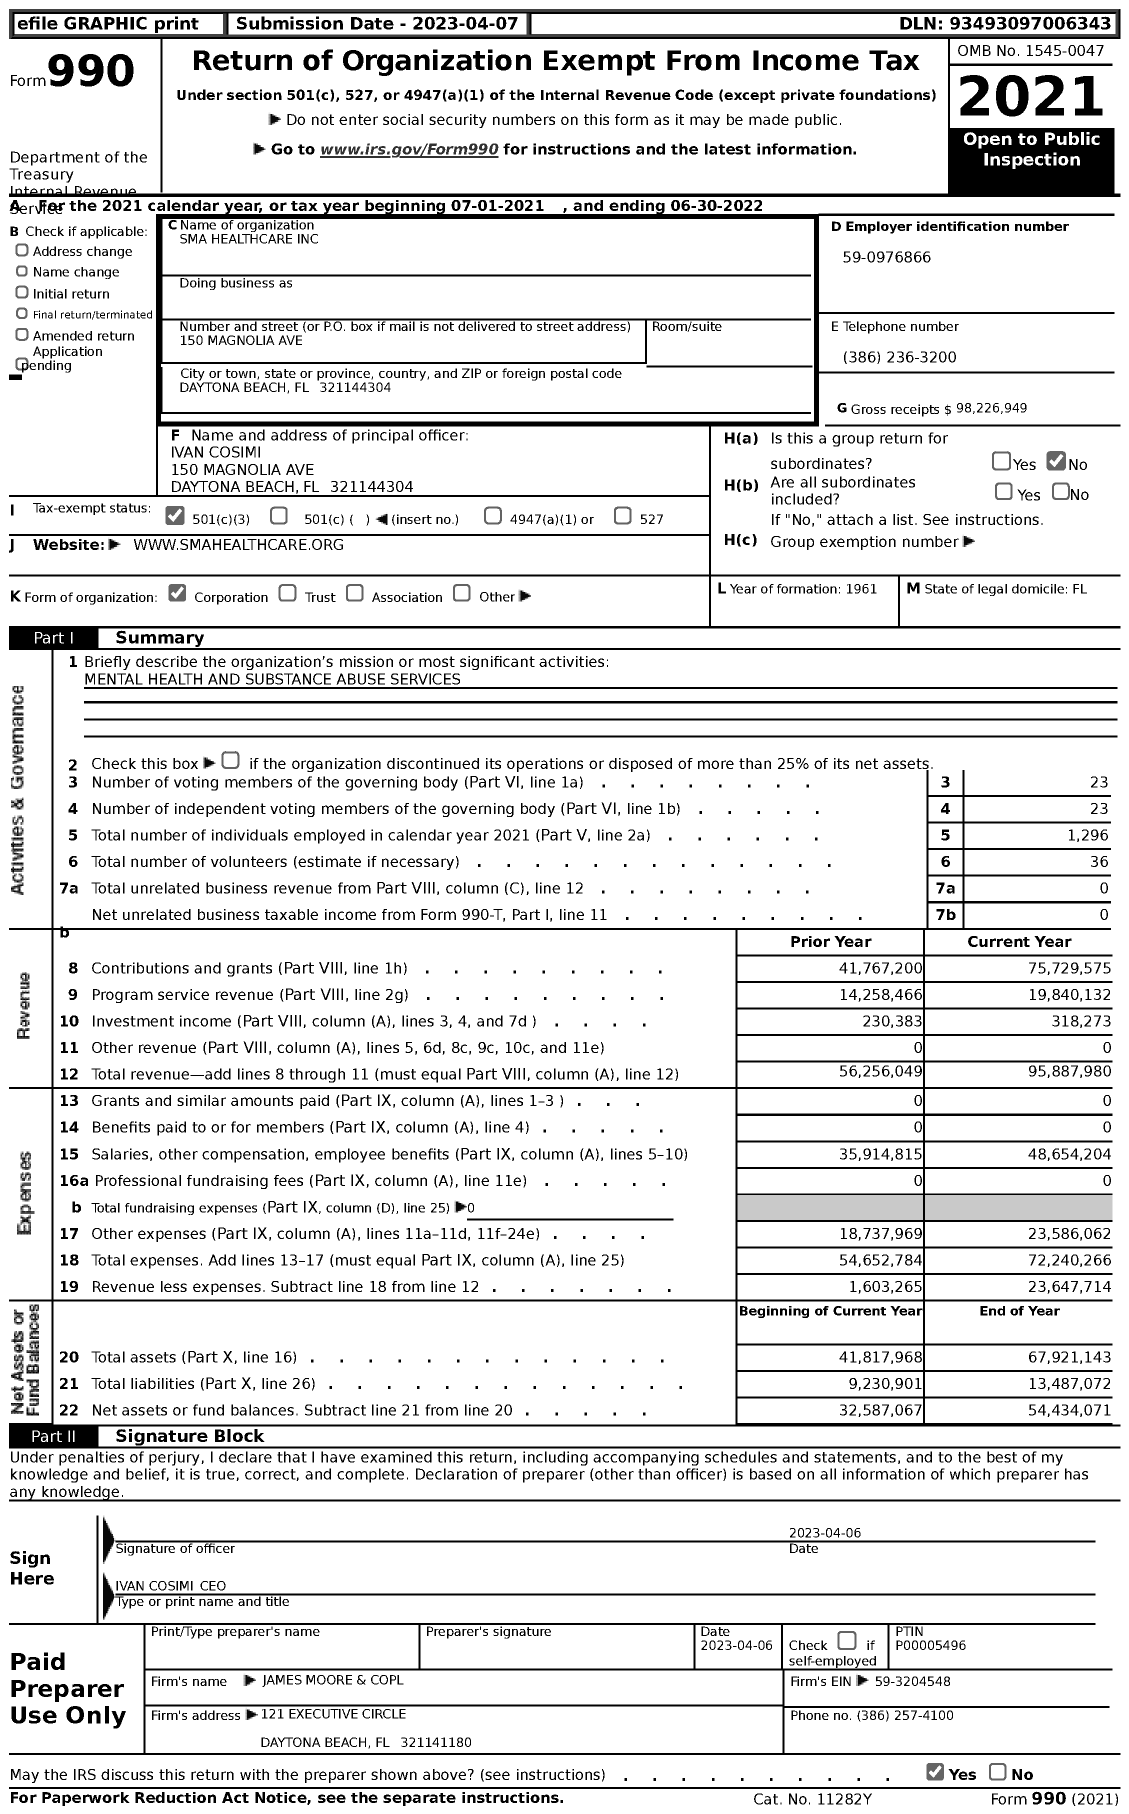 Image of first page of 2021 Form 990 for Sma Healthcare (SMA)